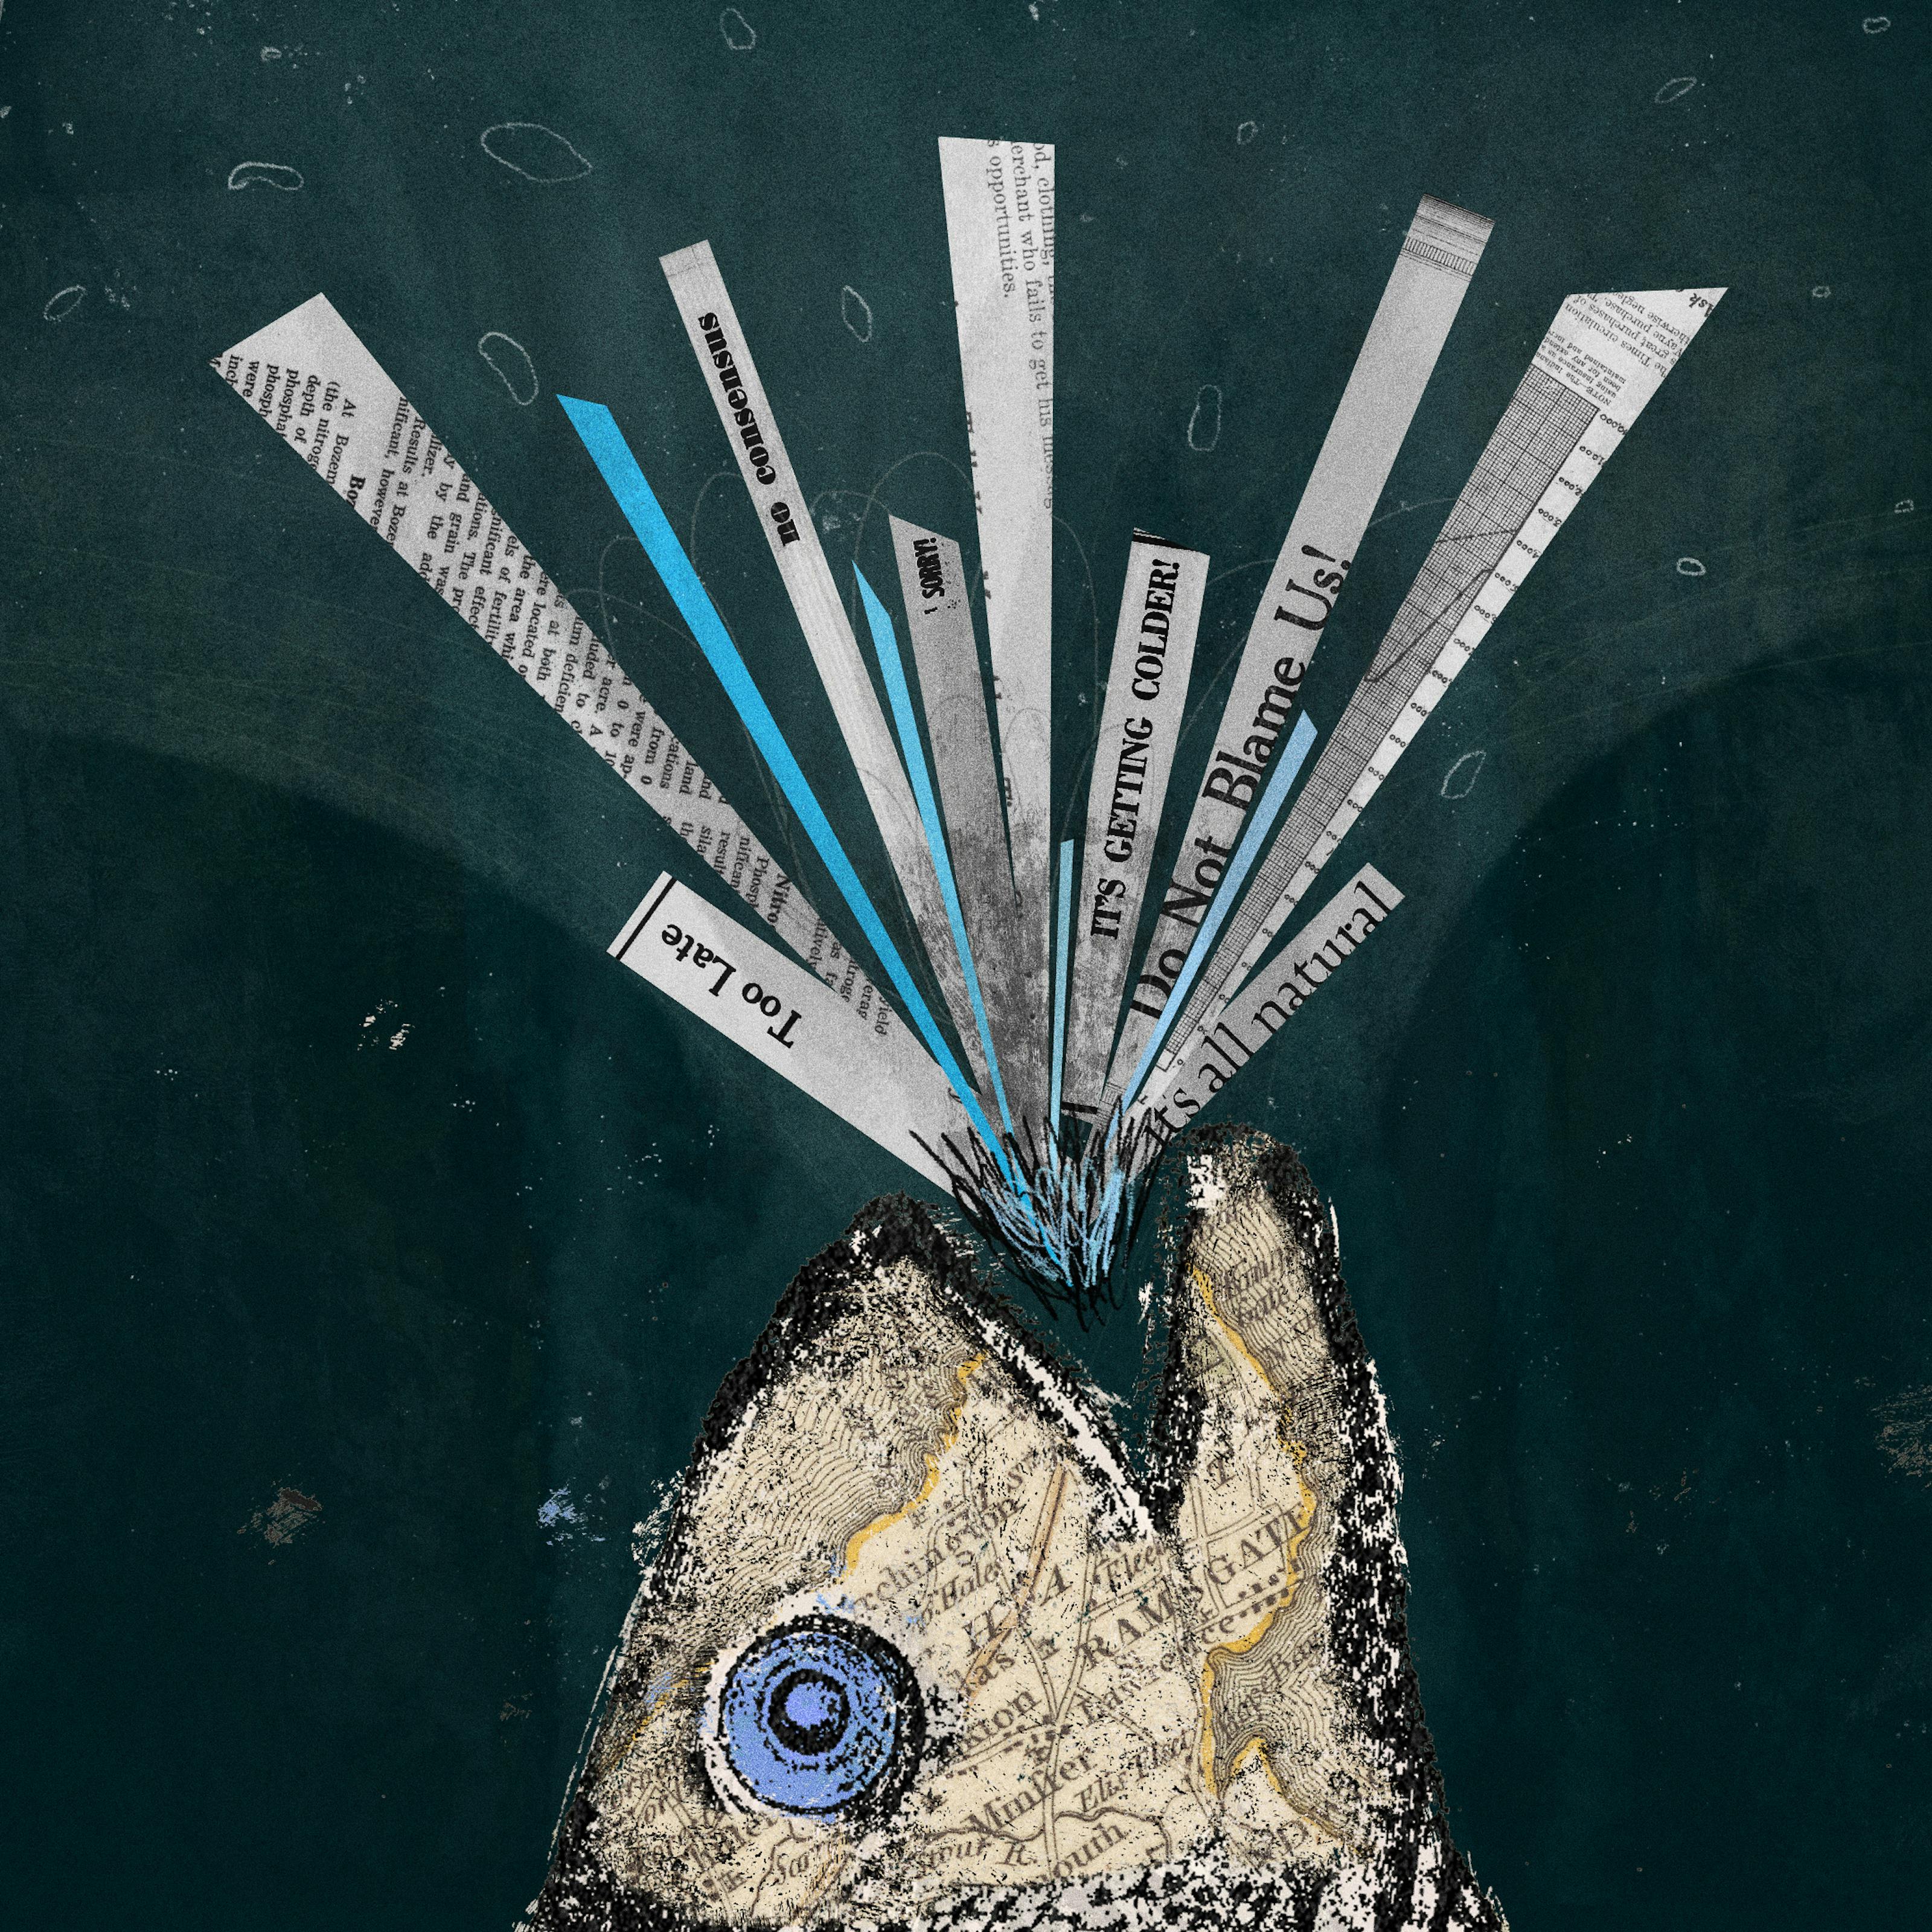 Mixed media digital artwork combining found imagery from vintage magazines and books with painted and textured elements. The overall hues are blues, yellows and greys. The illustration is split in two by a light grey and blue line running vertically through the image at a slight angle. On the left side of this line is a colour image of a fish floating vertically with its head upwards. The fish's scales are made up of a map showing the island of Thanet in Kent, England. The fish has a large blue eye and out of its mouth are several cut strips of newspaper text and headlines. The background is a dark rich marine blue representing water, speckled with air bubbles and debris. On the right side of the vertical lines, the image of the fish is duplicated and enlarged to reveal it in more detail. The newspaper text can now be read including the headlines, 'Too Late', 'It's getting colder!', 'no consensus', 'do not blame us' and 'it's all natural'.